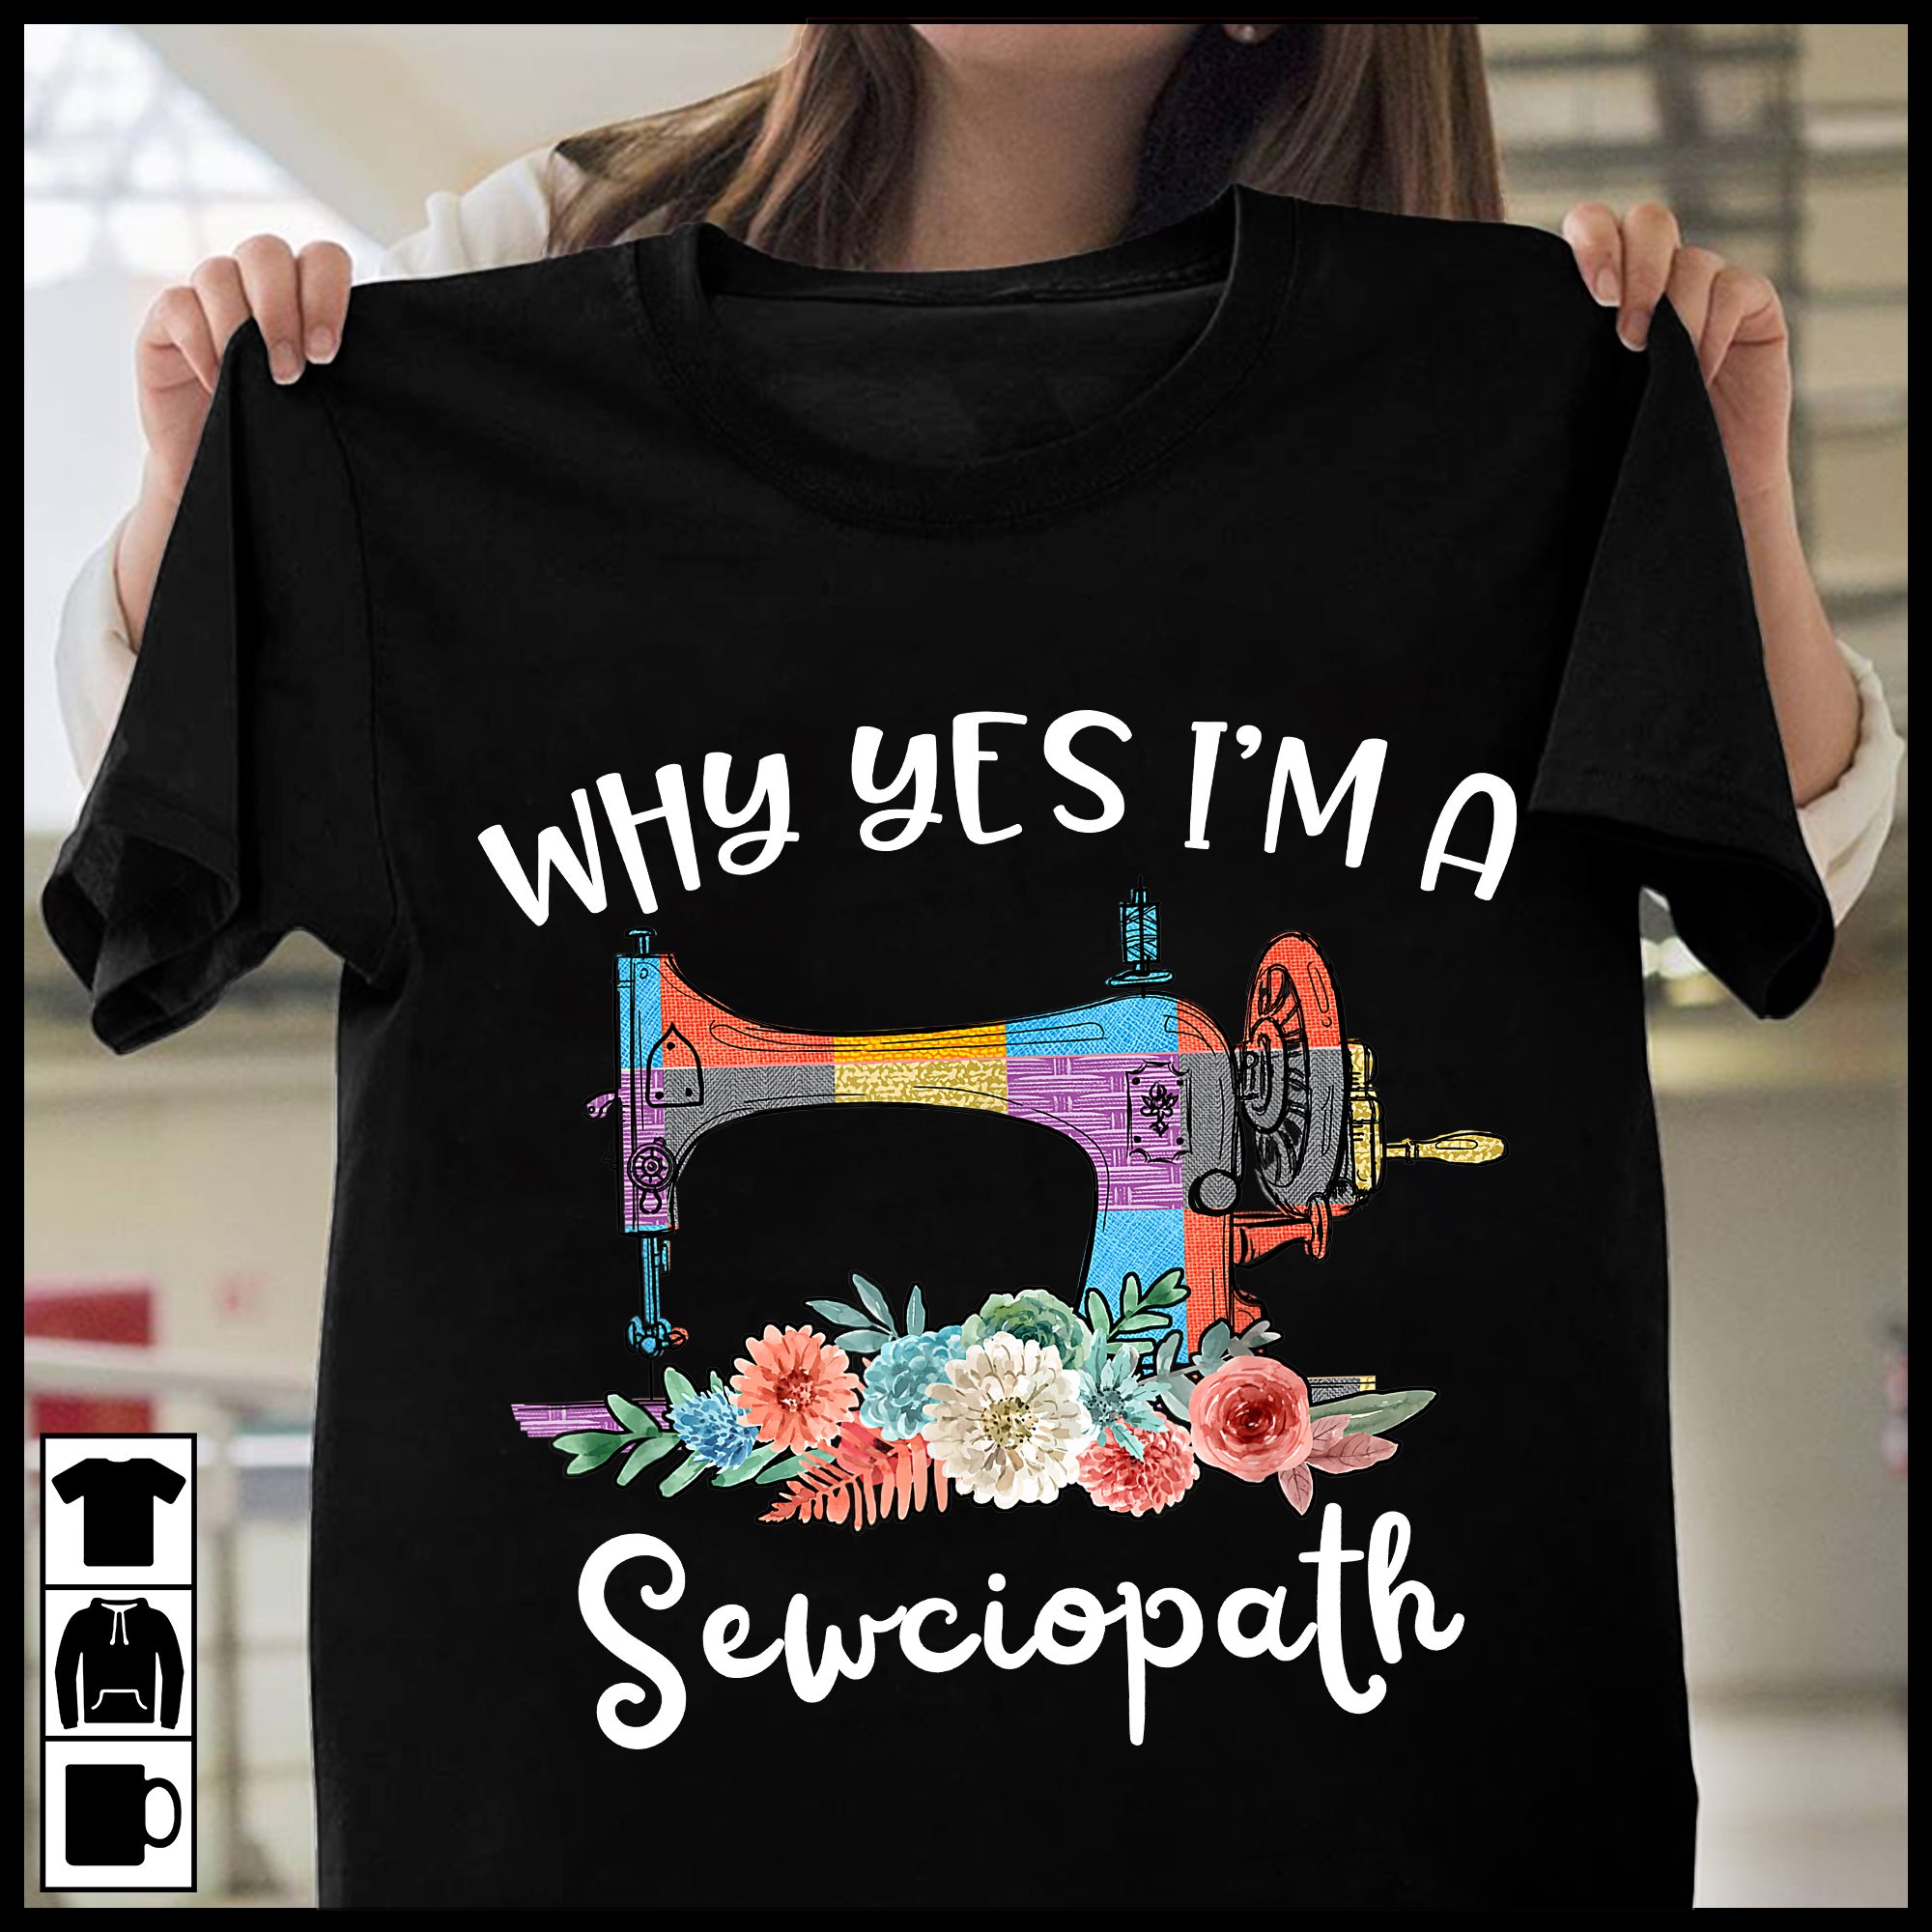 Why yes I'm sewciopath - Sewing machine, sewing lover